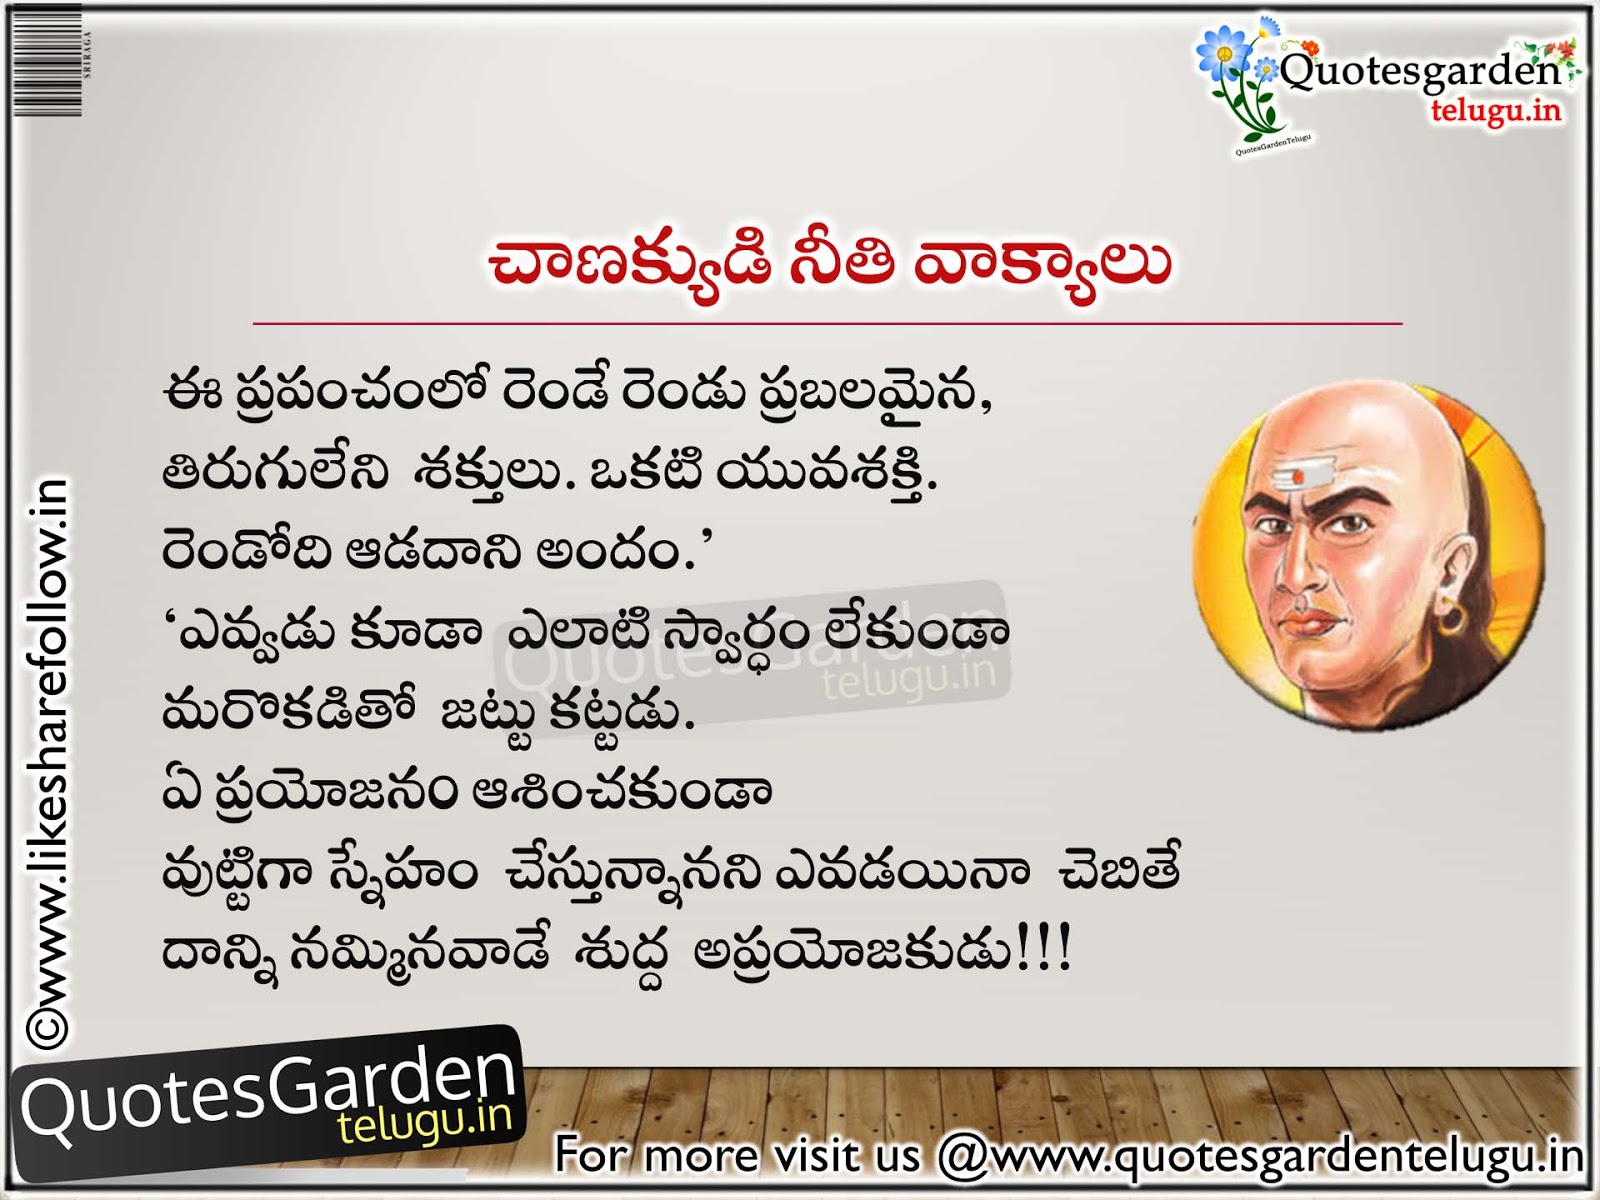 All time best quotes of chanakya in telugu | QUOTES GARDEN TELUGU | Telugu Quotes | English ...